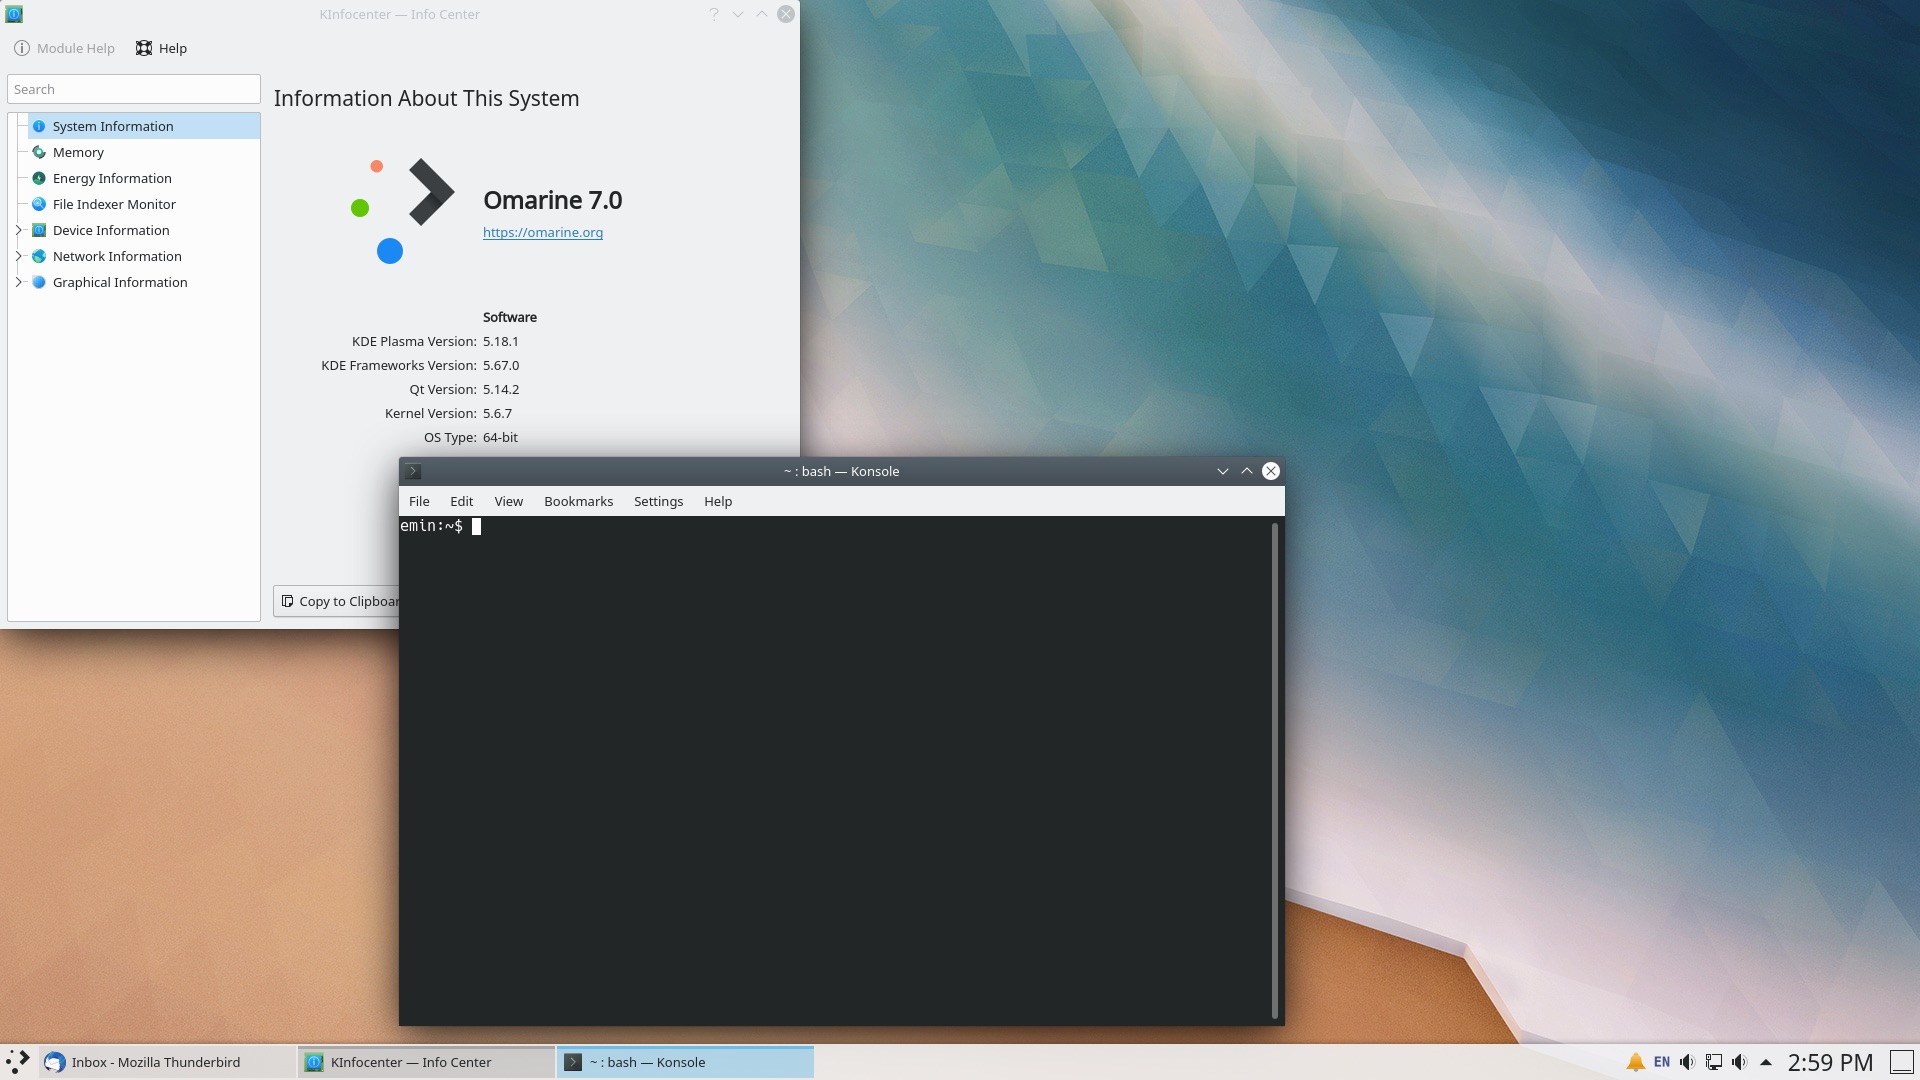 Server-Oriented Omarine 7.0 Linux OS Released with Enhanced Security